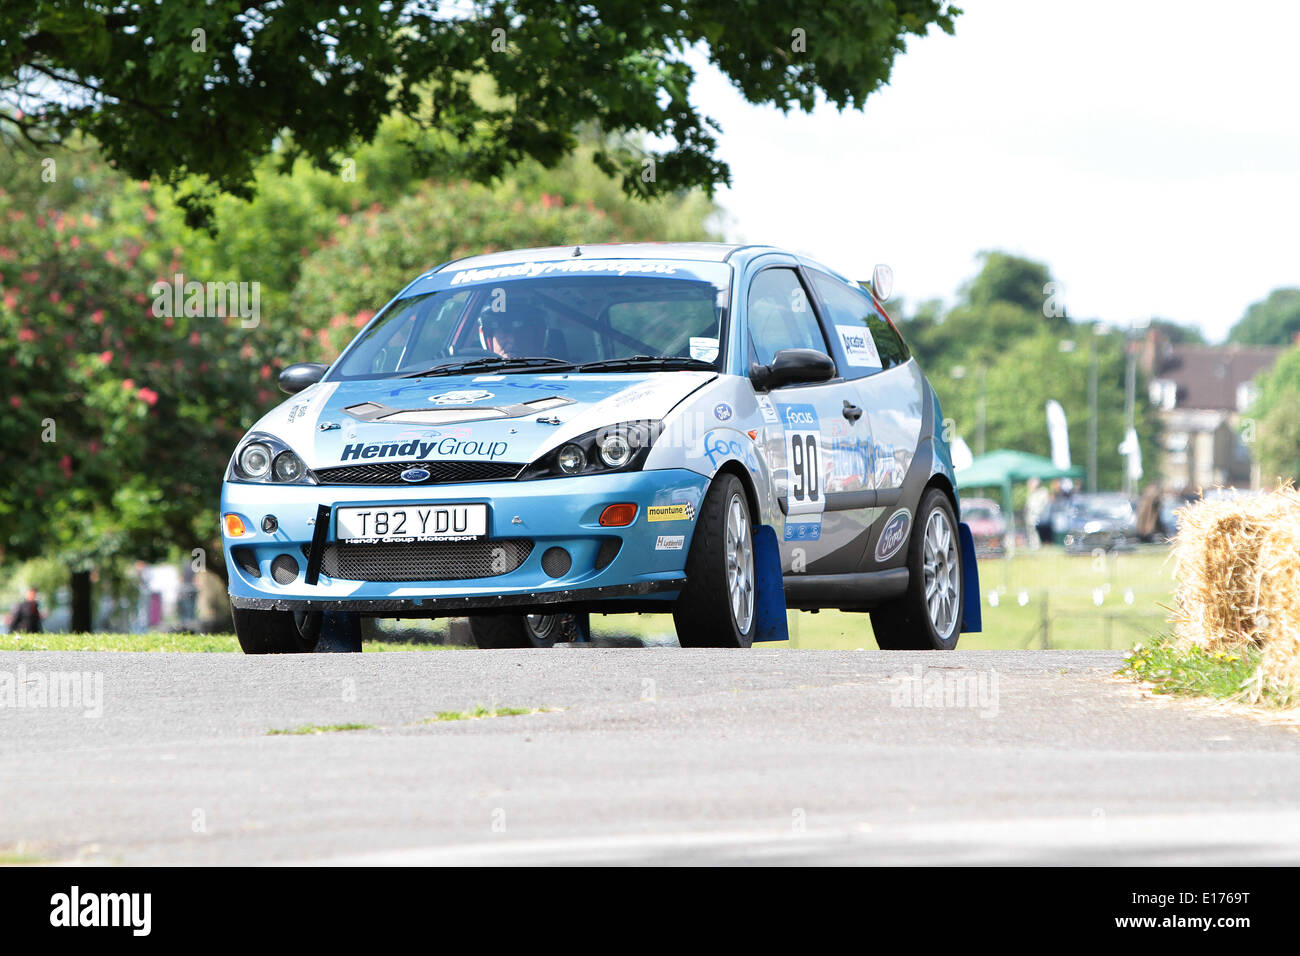 London, UK. 25th May, 2014. Competitors at the 2014 Motor Sport At The Palace at Crystal Palace Park South London 25.05.2014 Credit:  theodore liasi/Alamy Live News Stock Photo